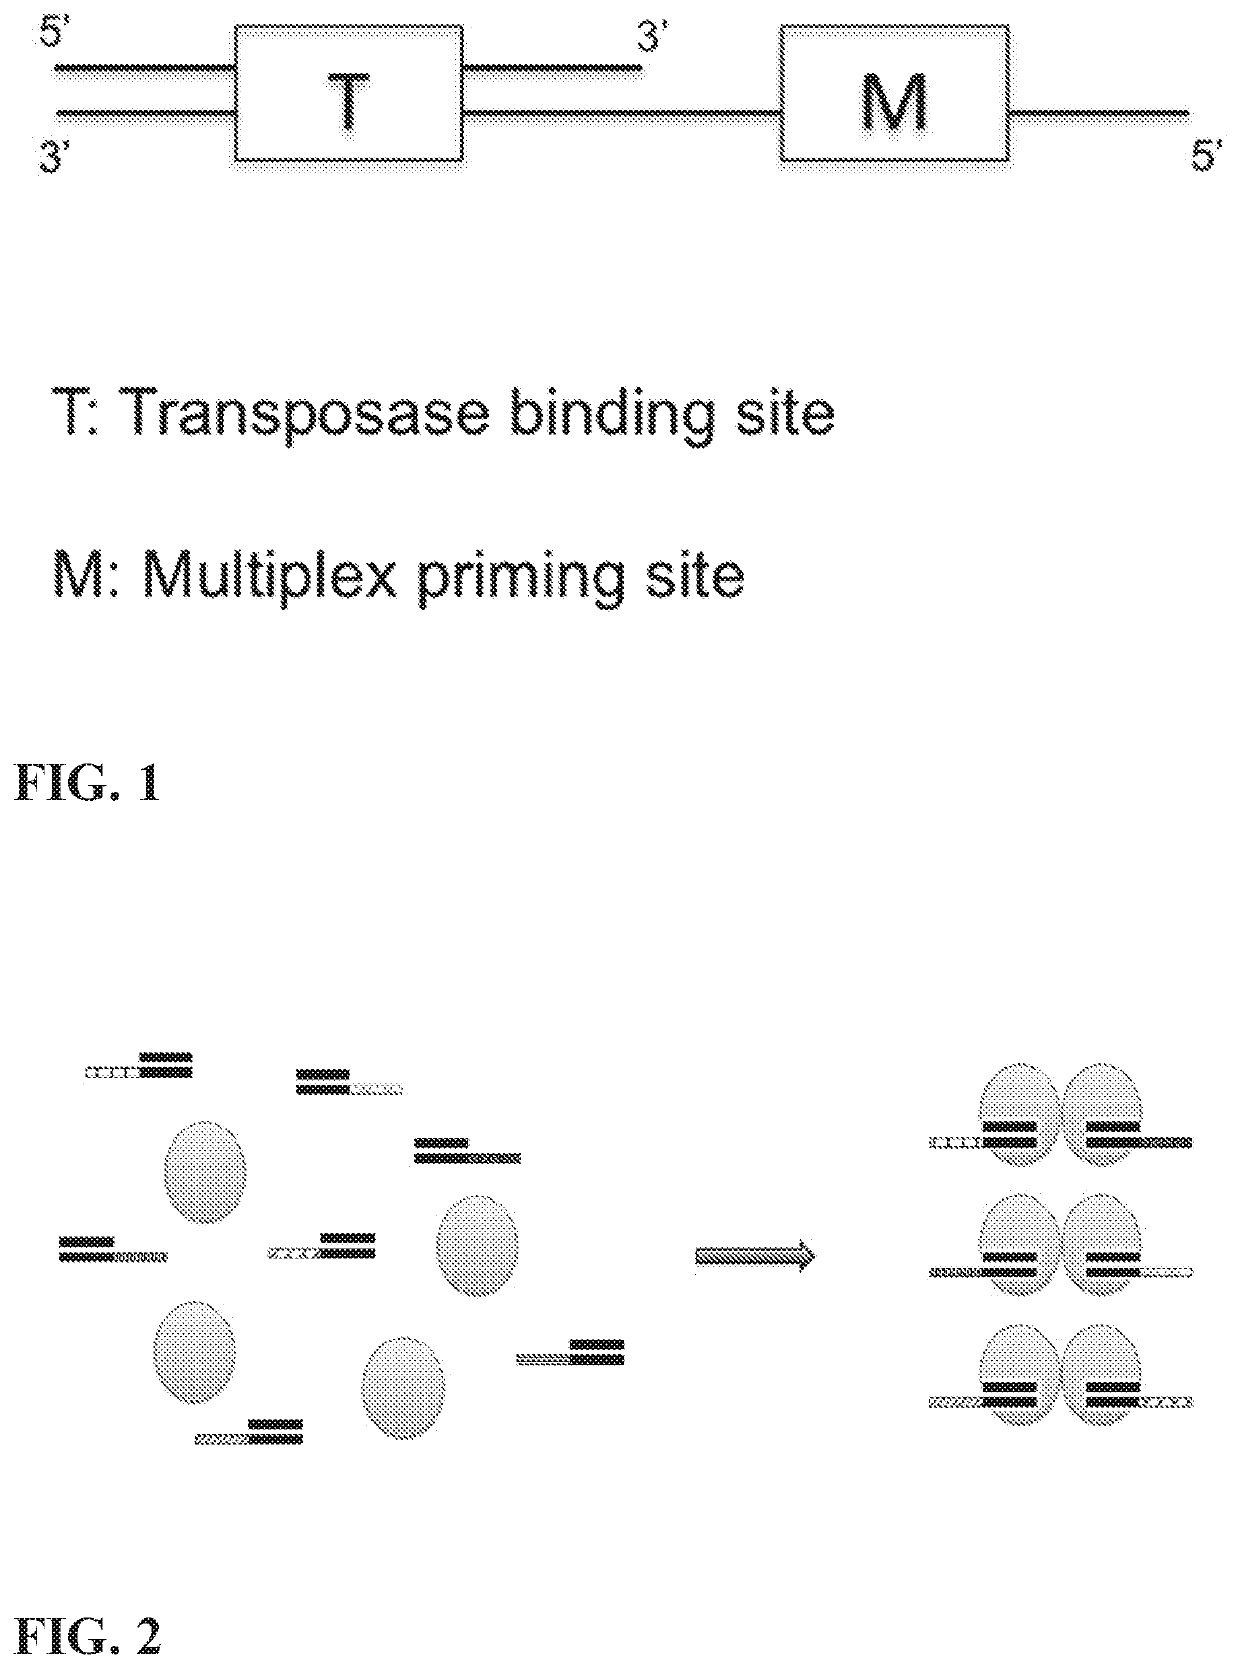 Multiplex End-Tagging Amplification of Nucleic Acids